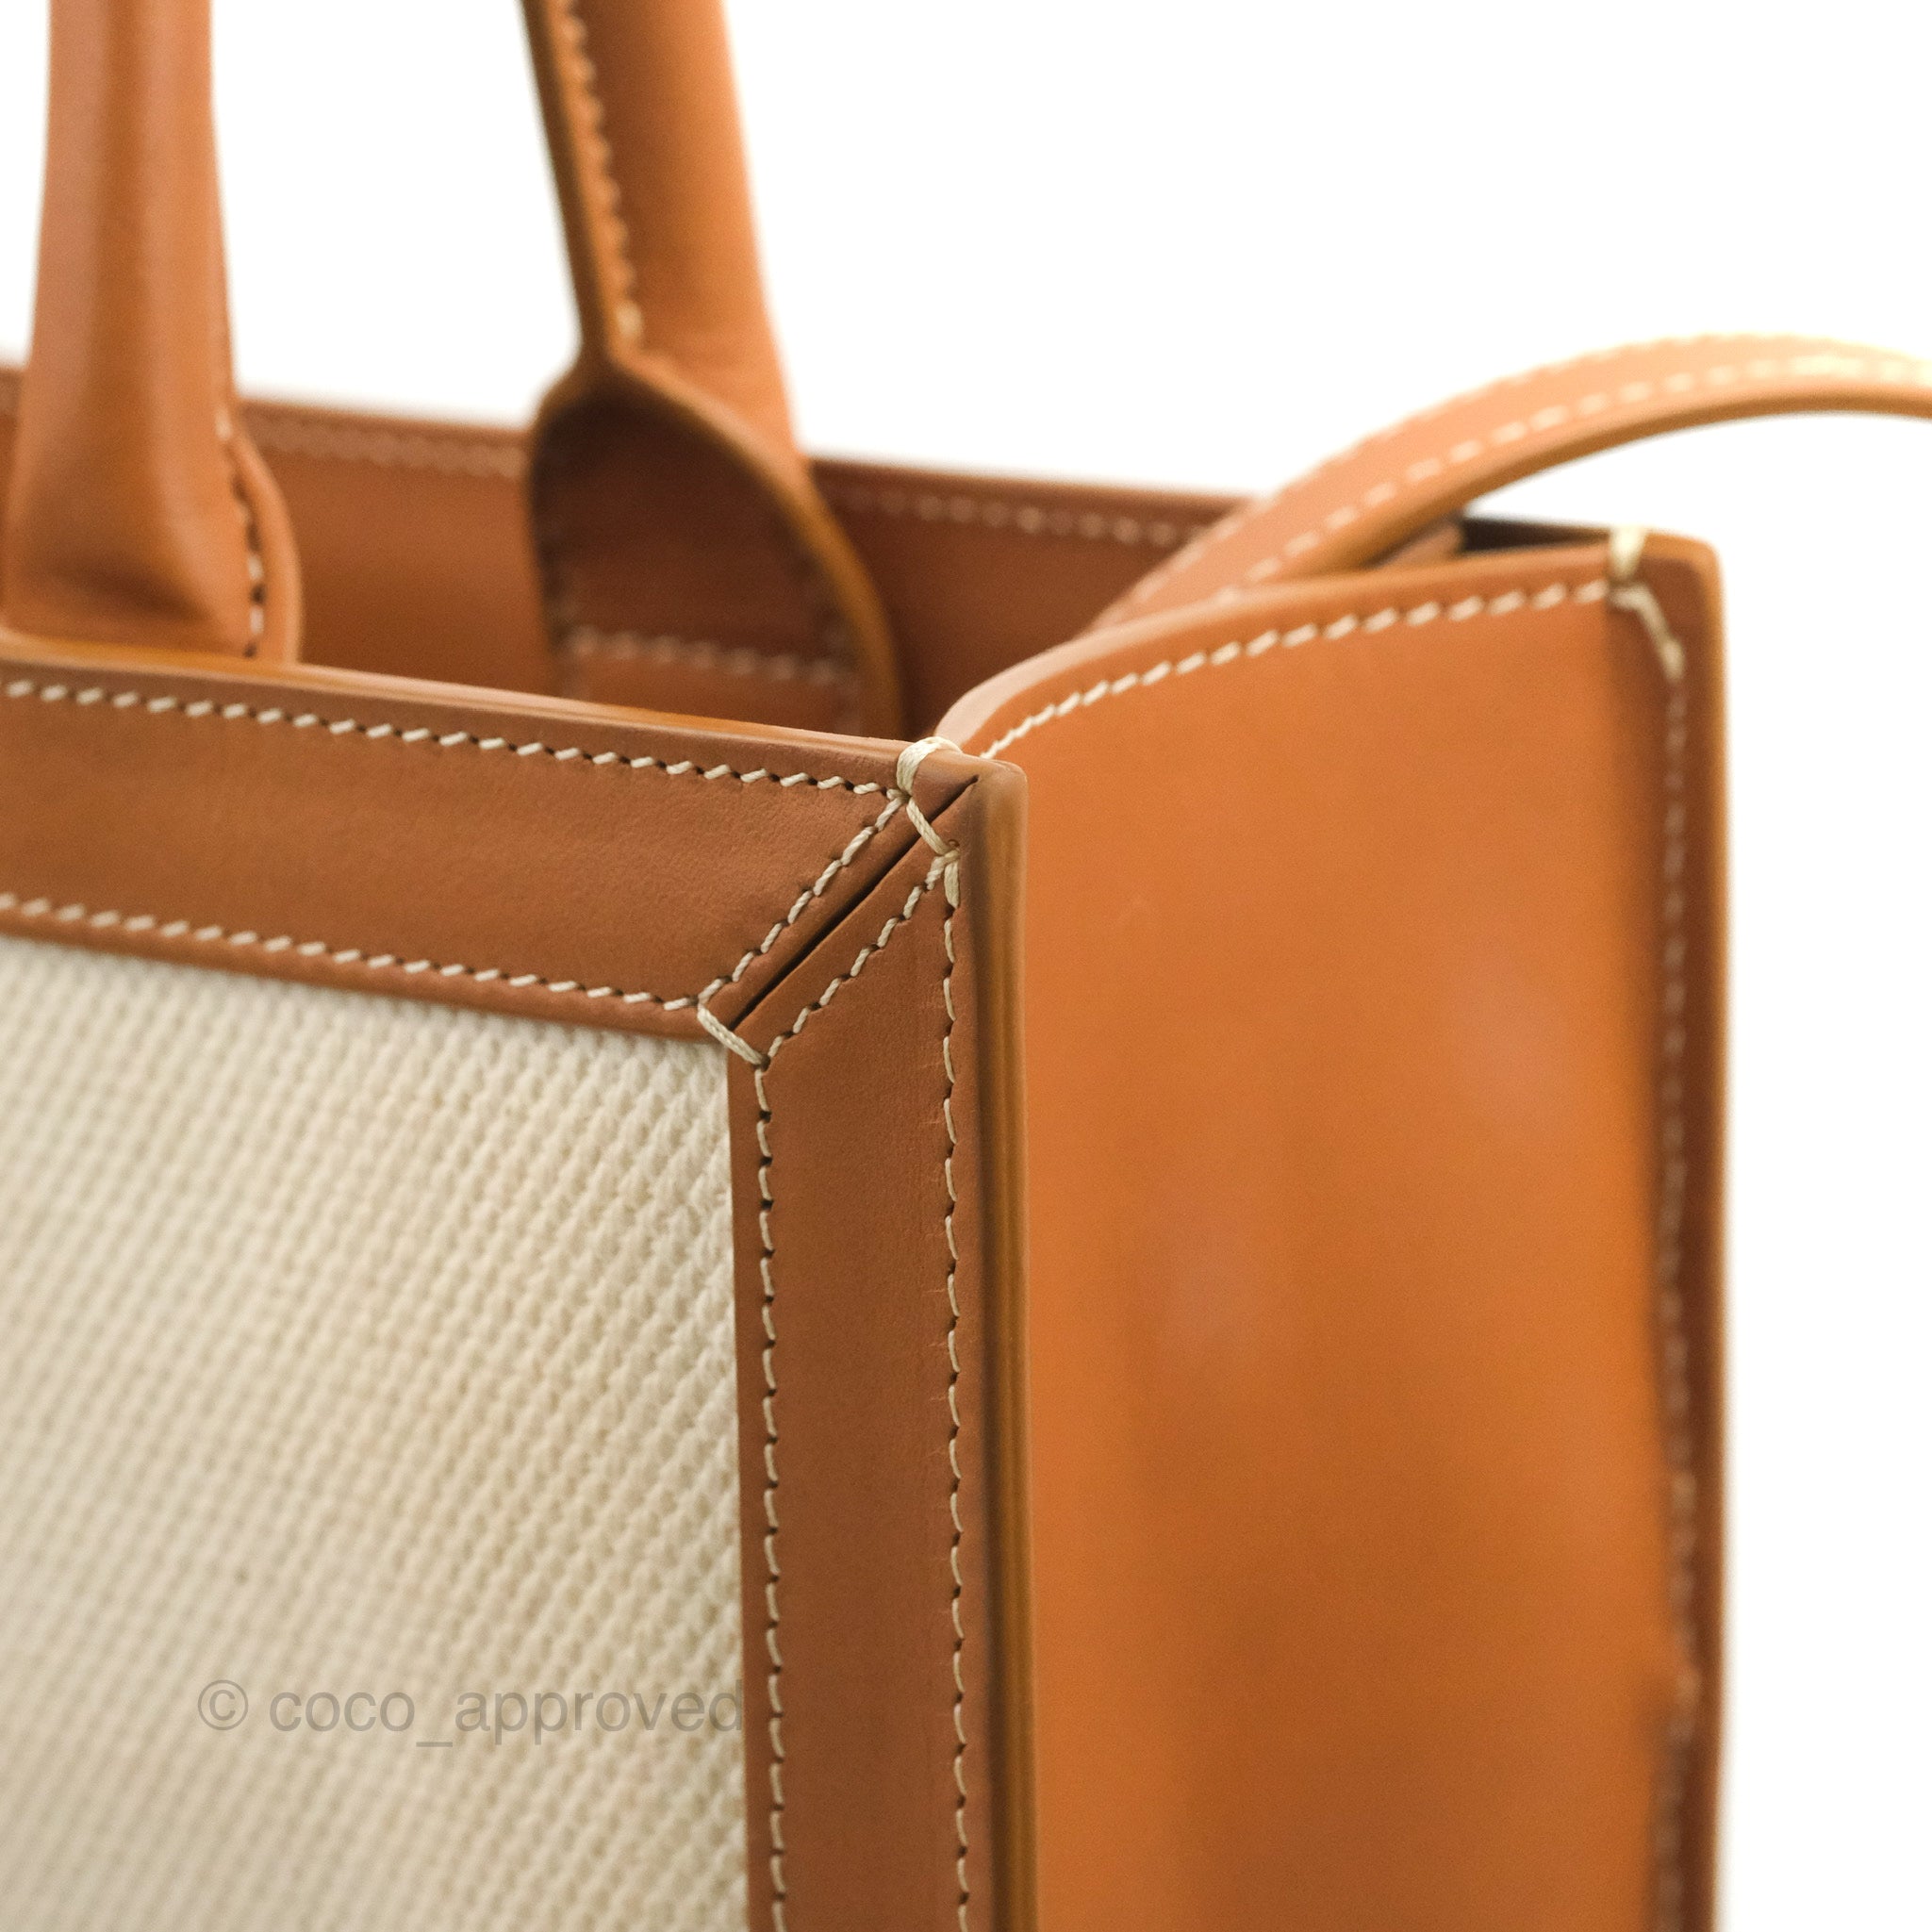 Celine Tan Logo Canvas and Leather Mini Vertical Cabas Tote at